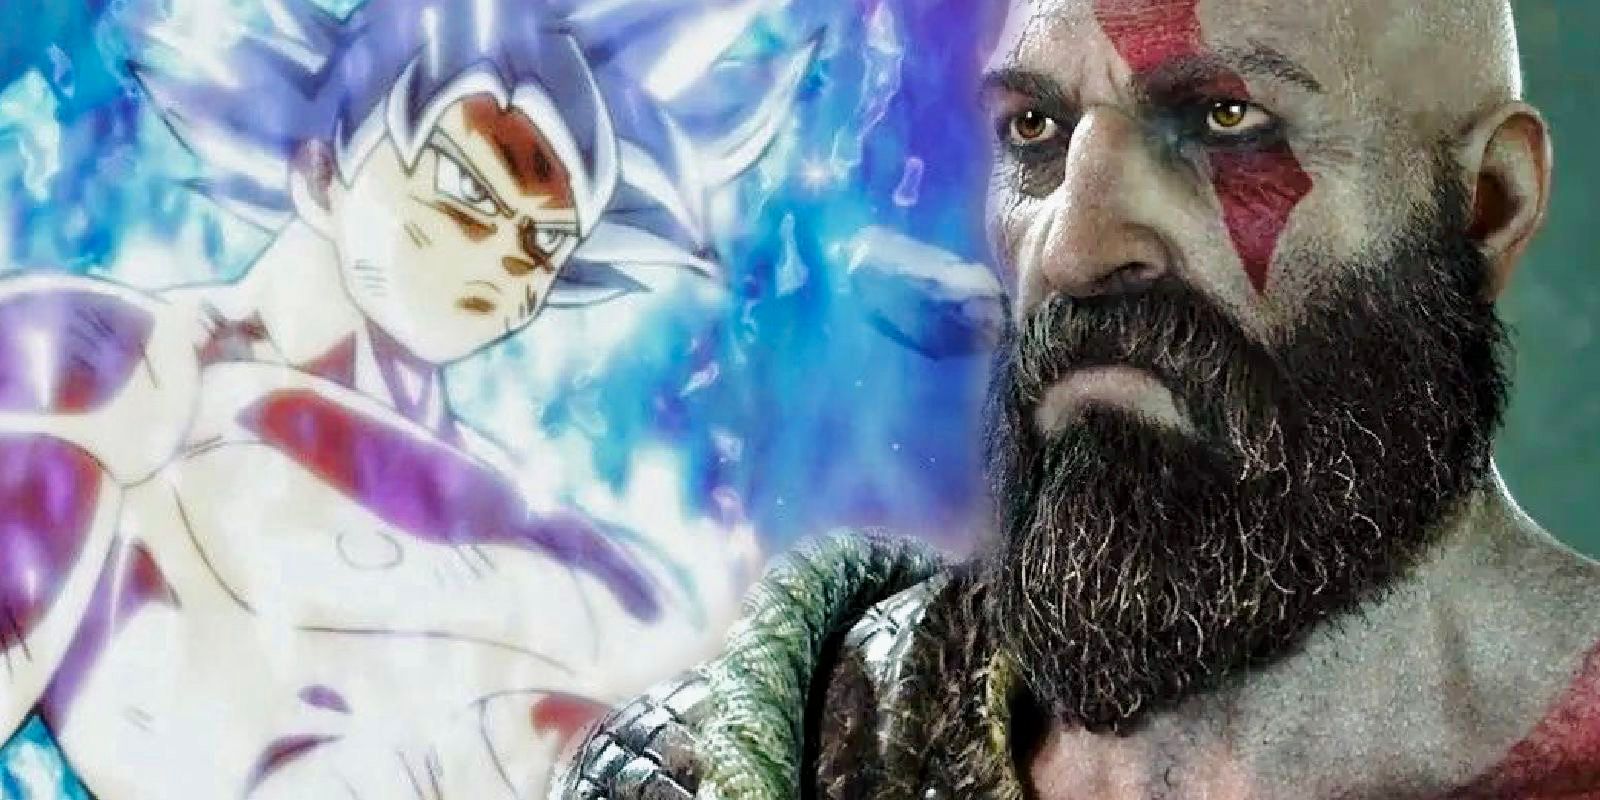 Goku from Dragon Ball and Kratos from God of War face off 